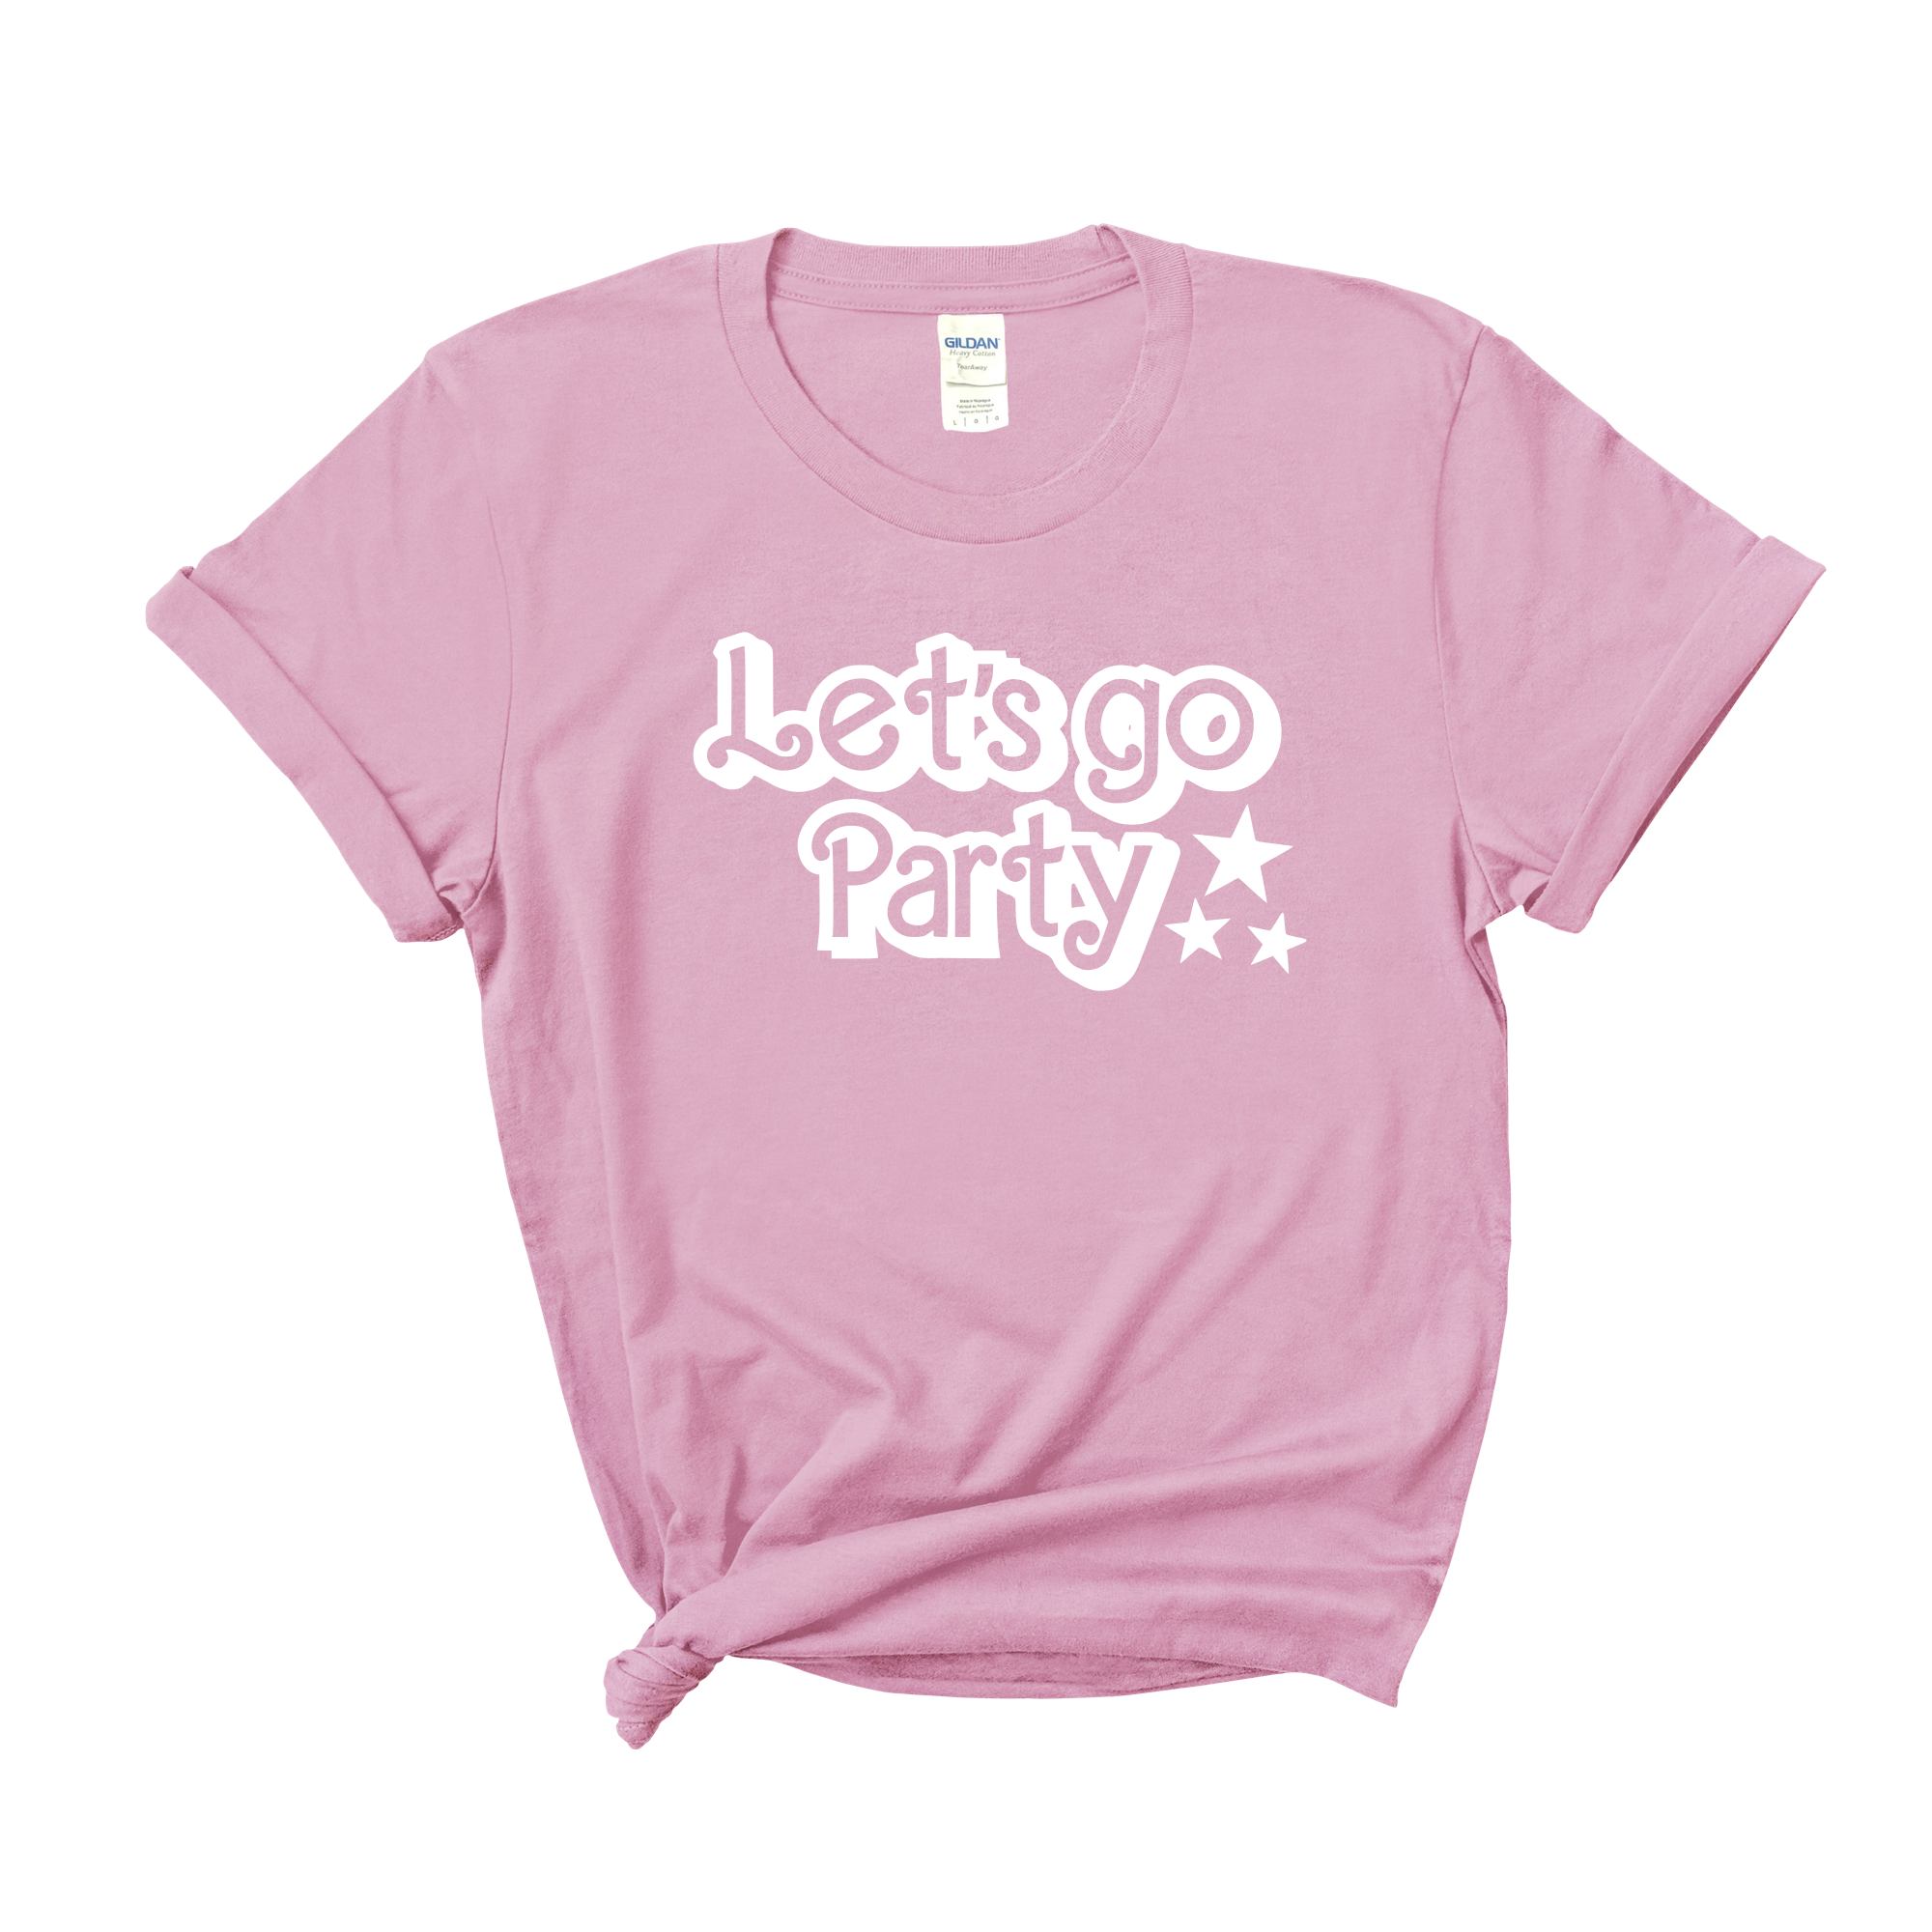 Let's go Party Tee